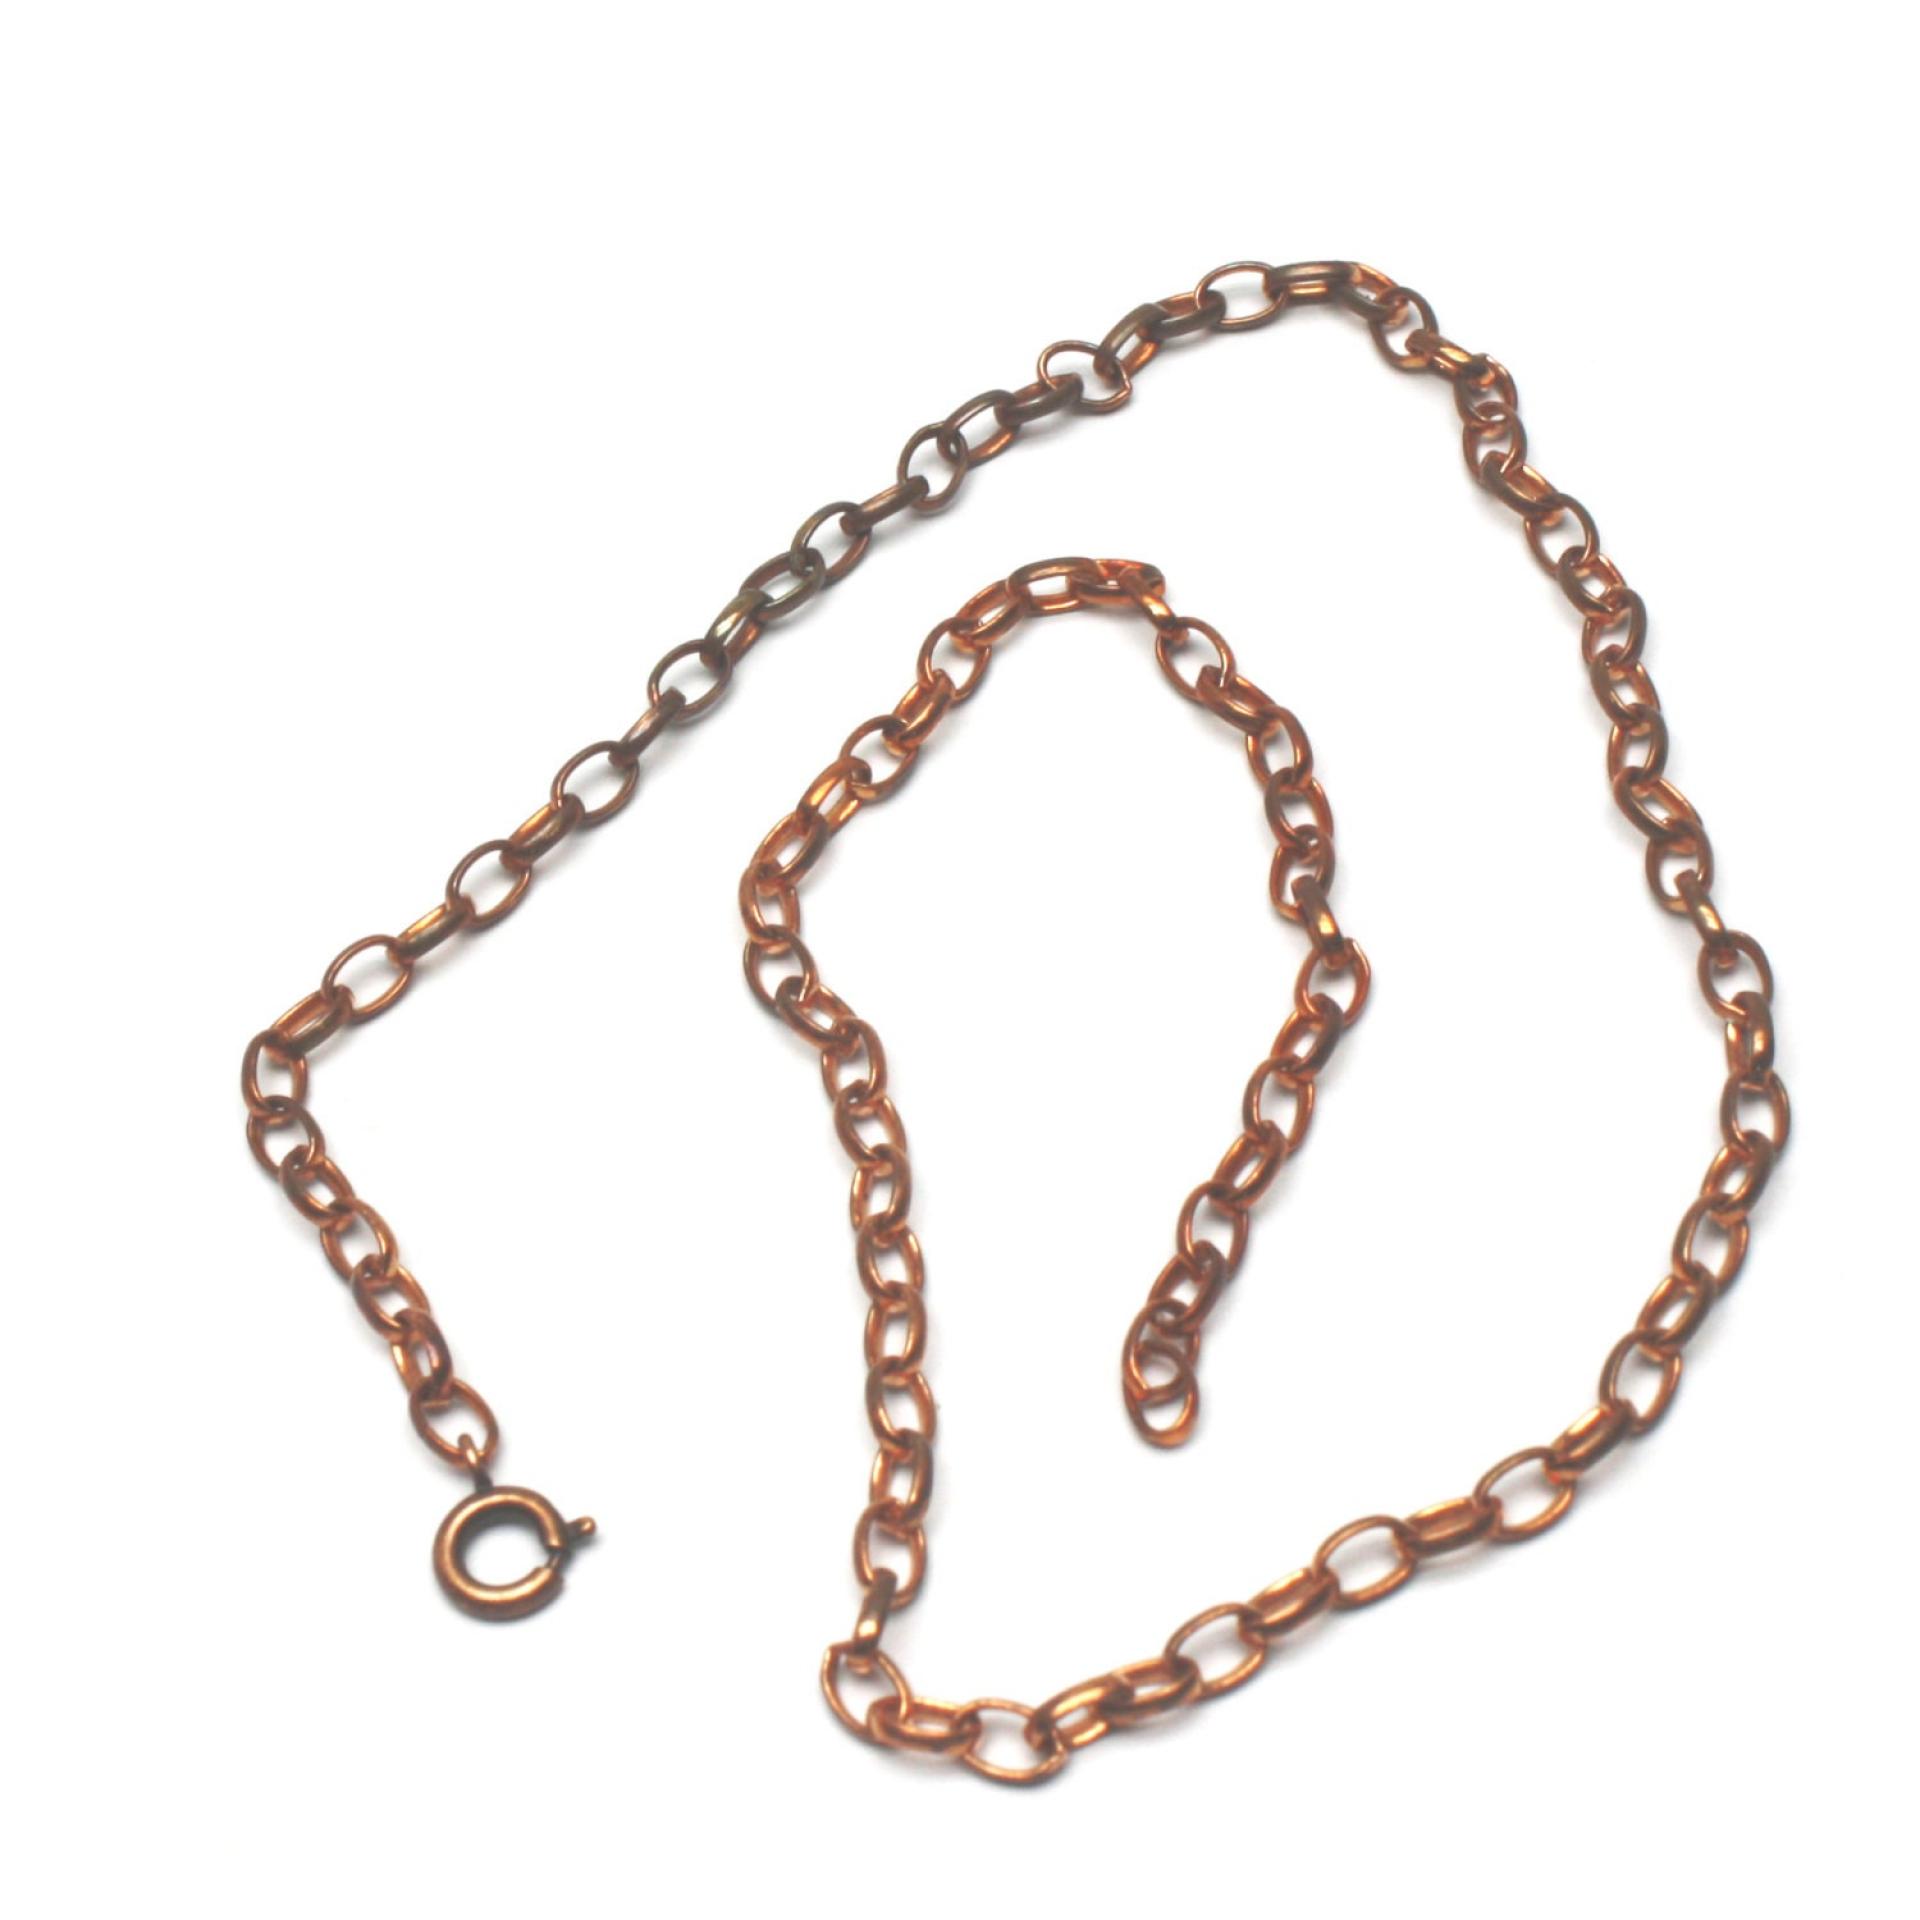 Solid Copper Chain Necklace, 3.8 mm Soldered, 16", 18", 20", 22", 24" choose length